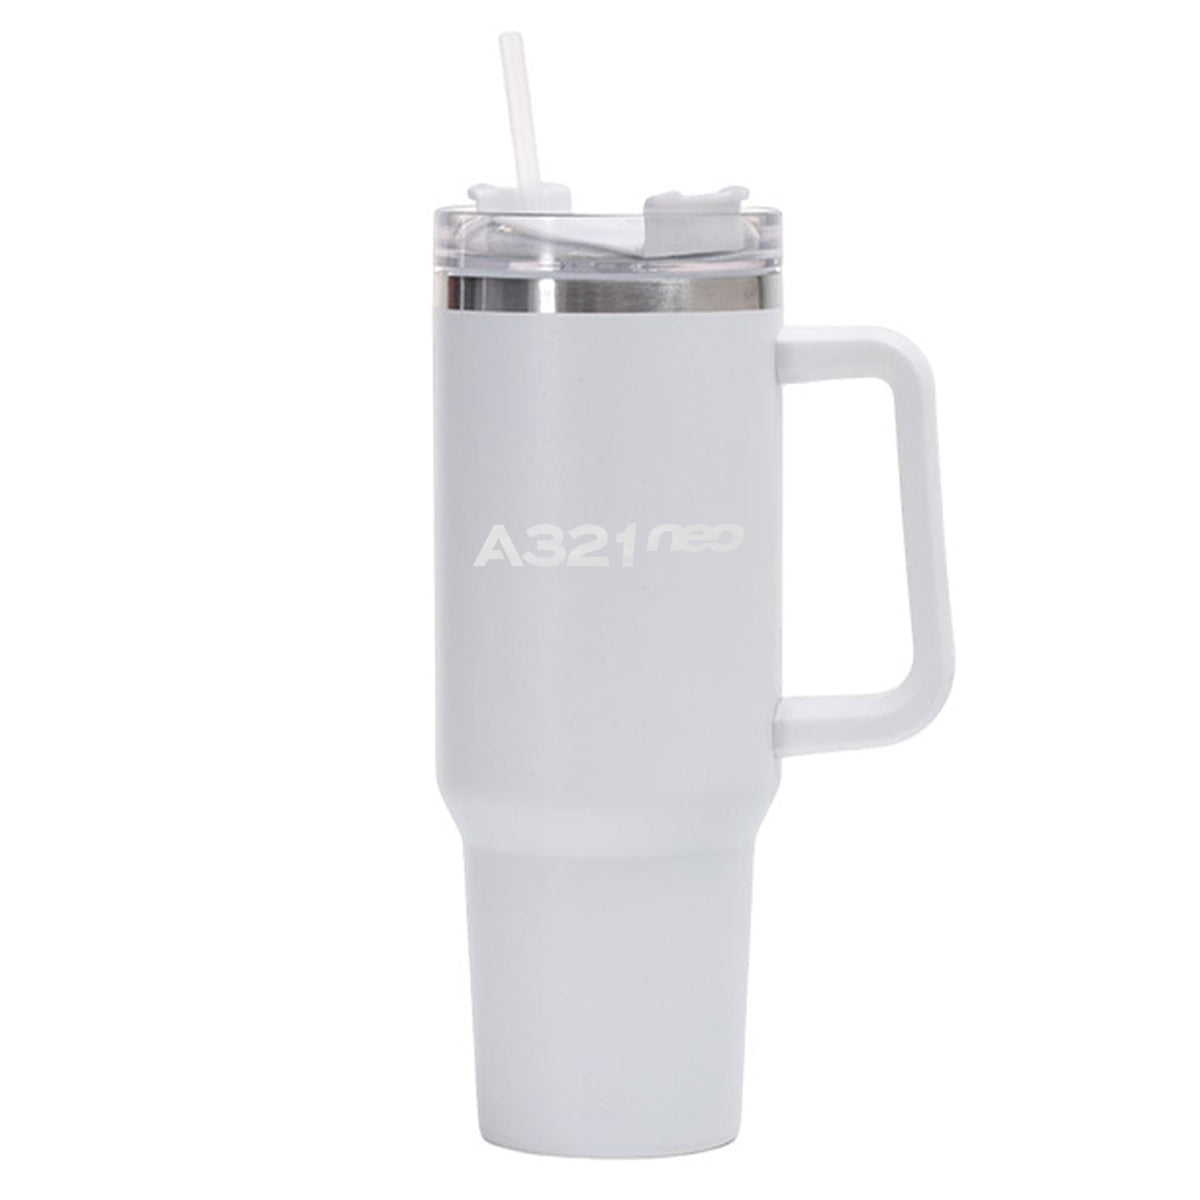 A321neo & Text Designed 40oz Stainless Steel Car Mug With Holder